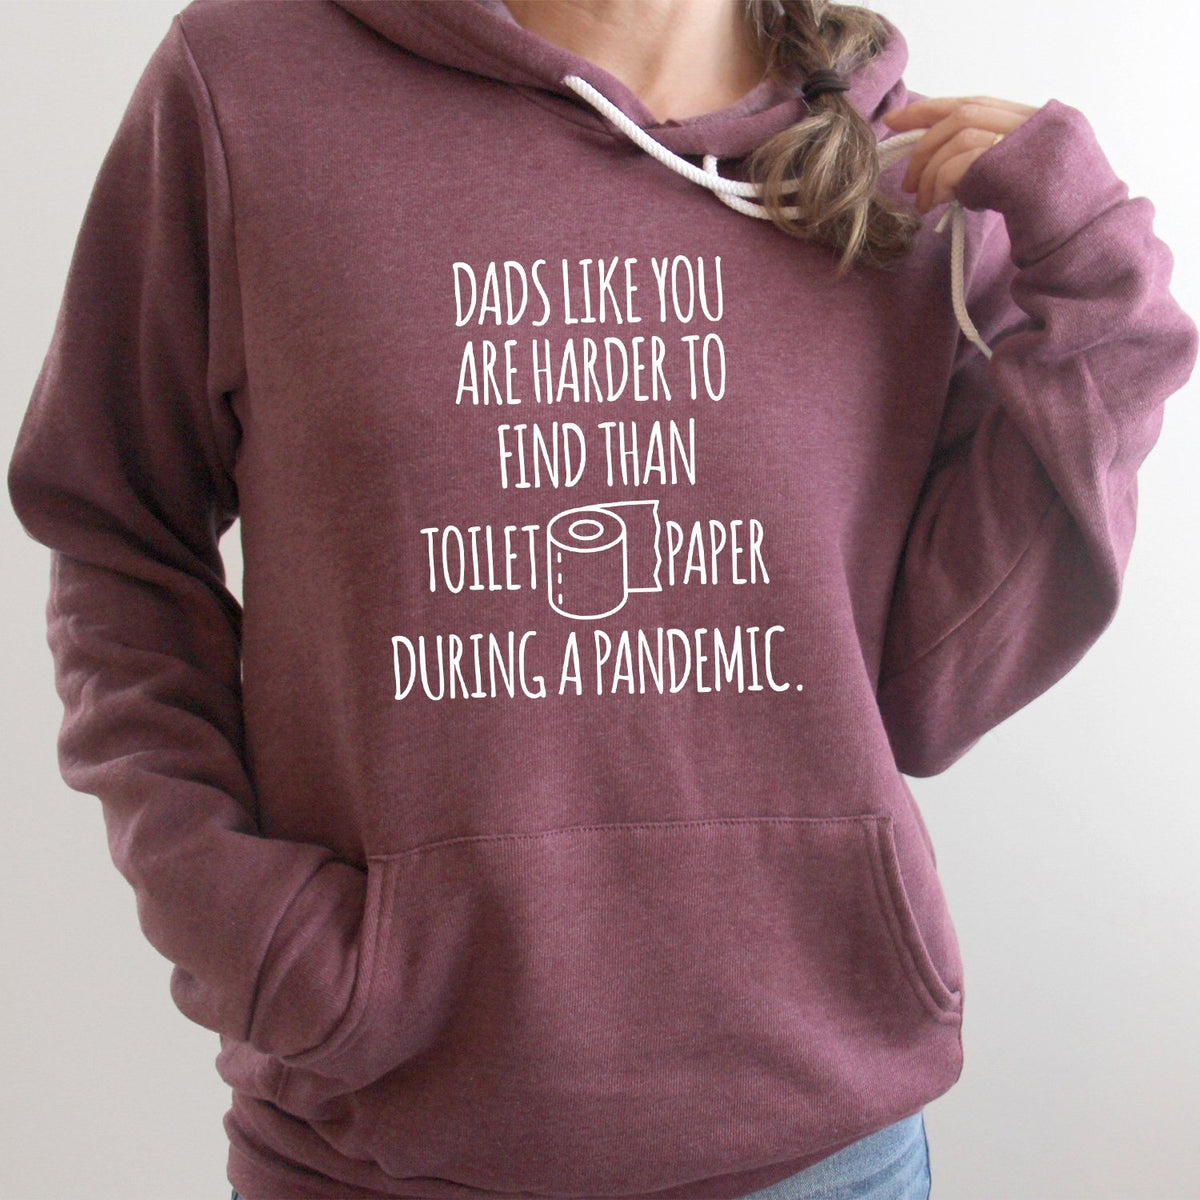 Dads Like You Are Harder to Find Than Toilet Paper During A Pandemic - Hoodie Sweatshirt